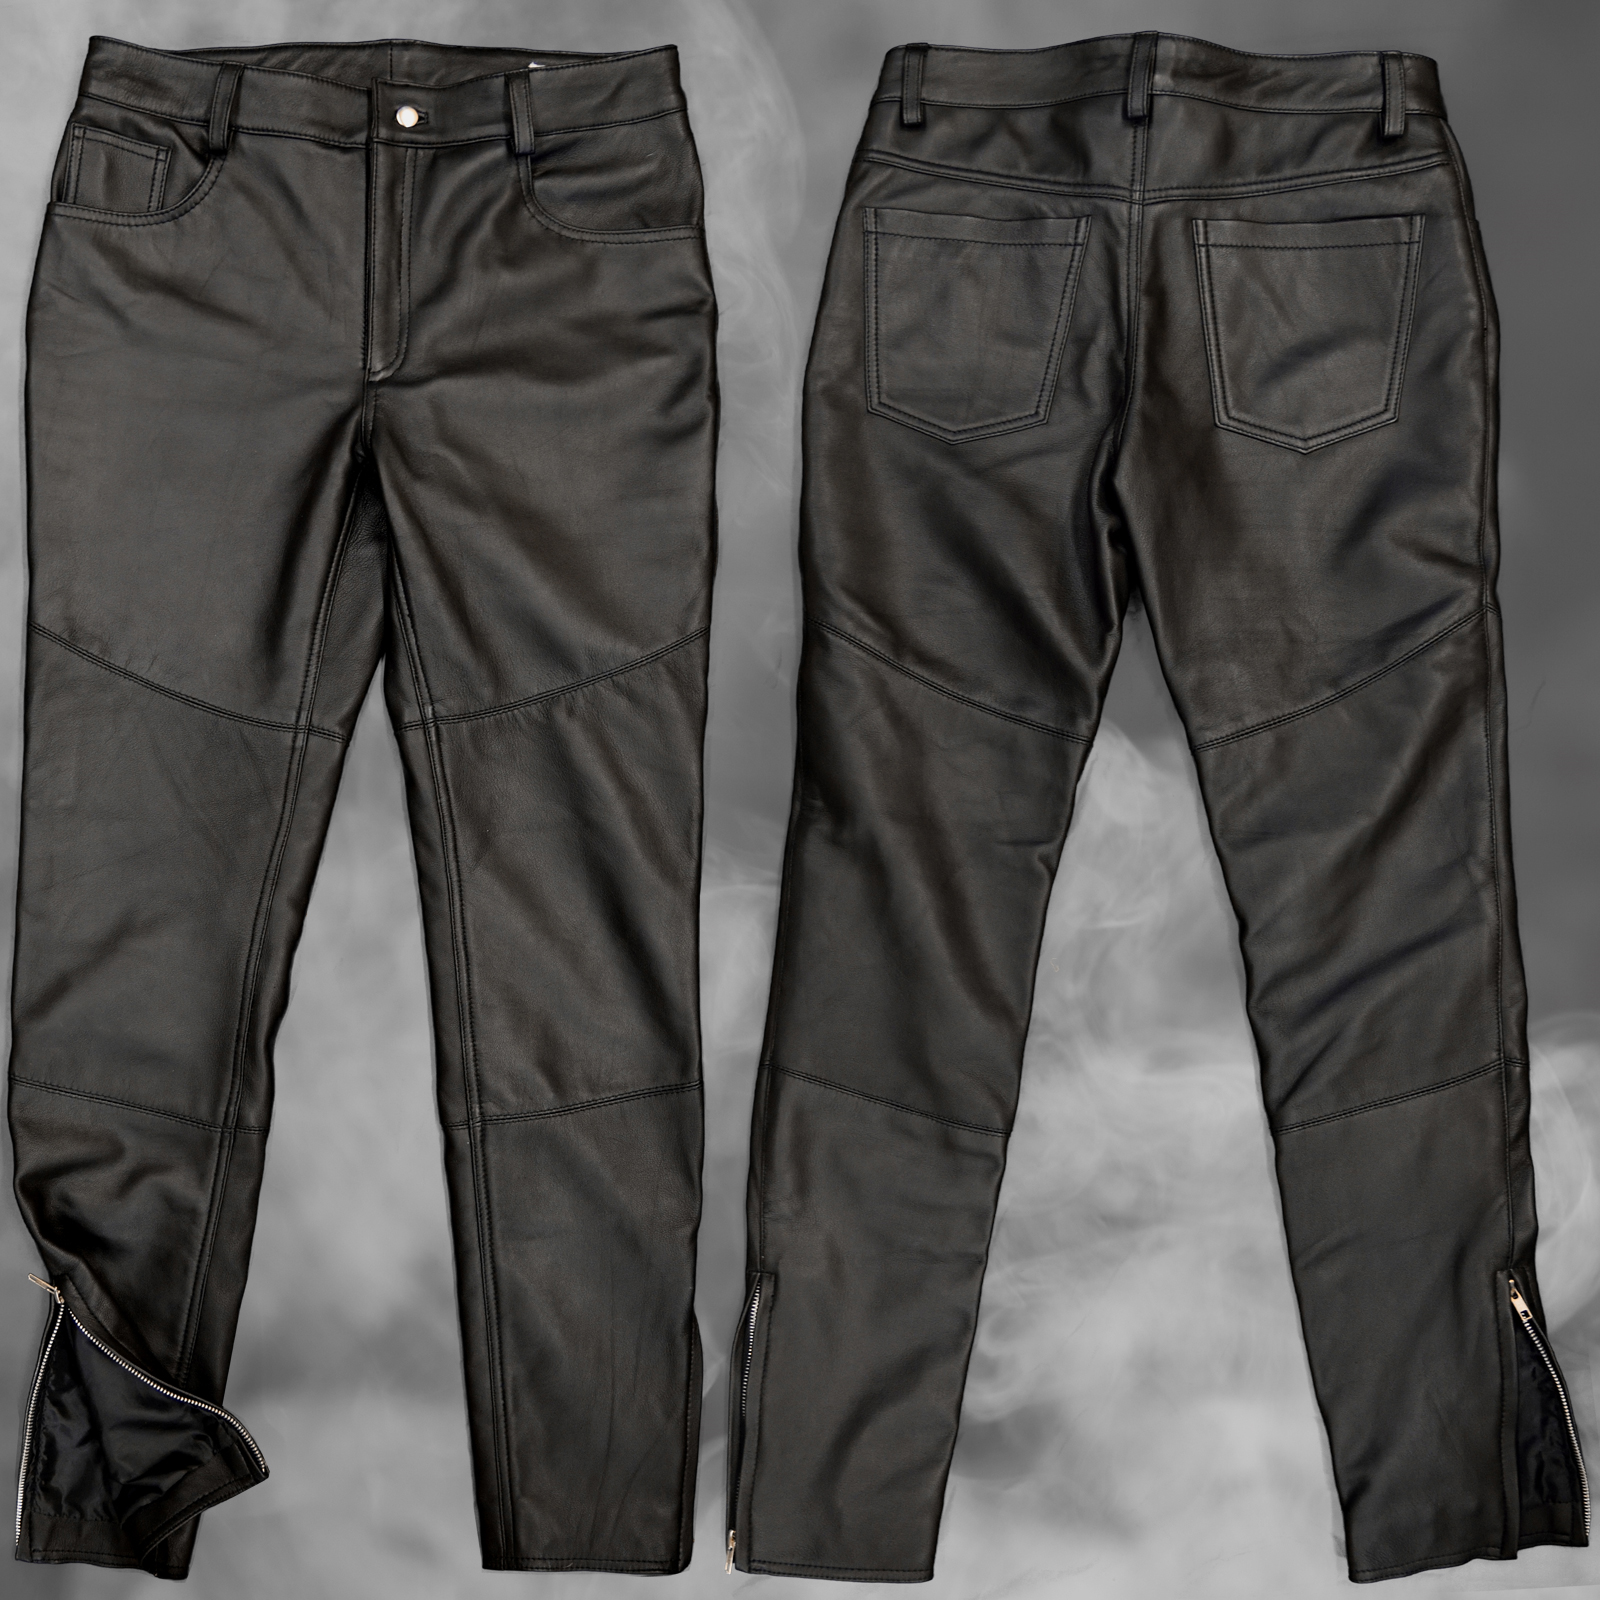 Terminator 2 Leather Pants Max Cady